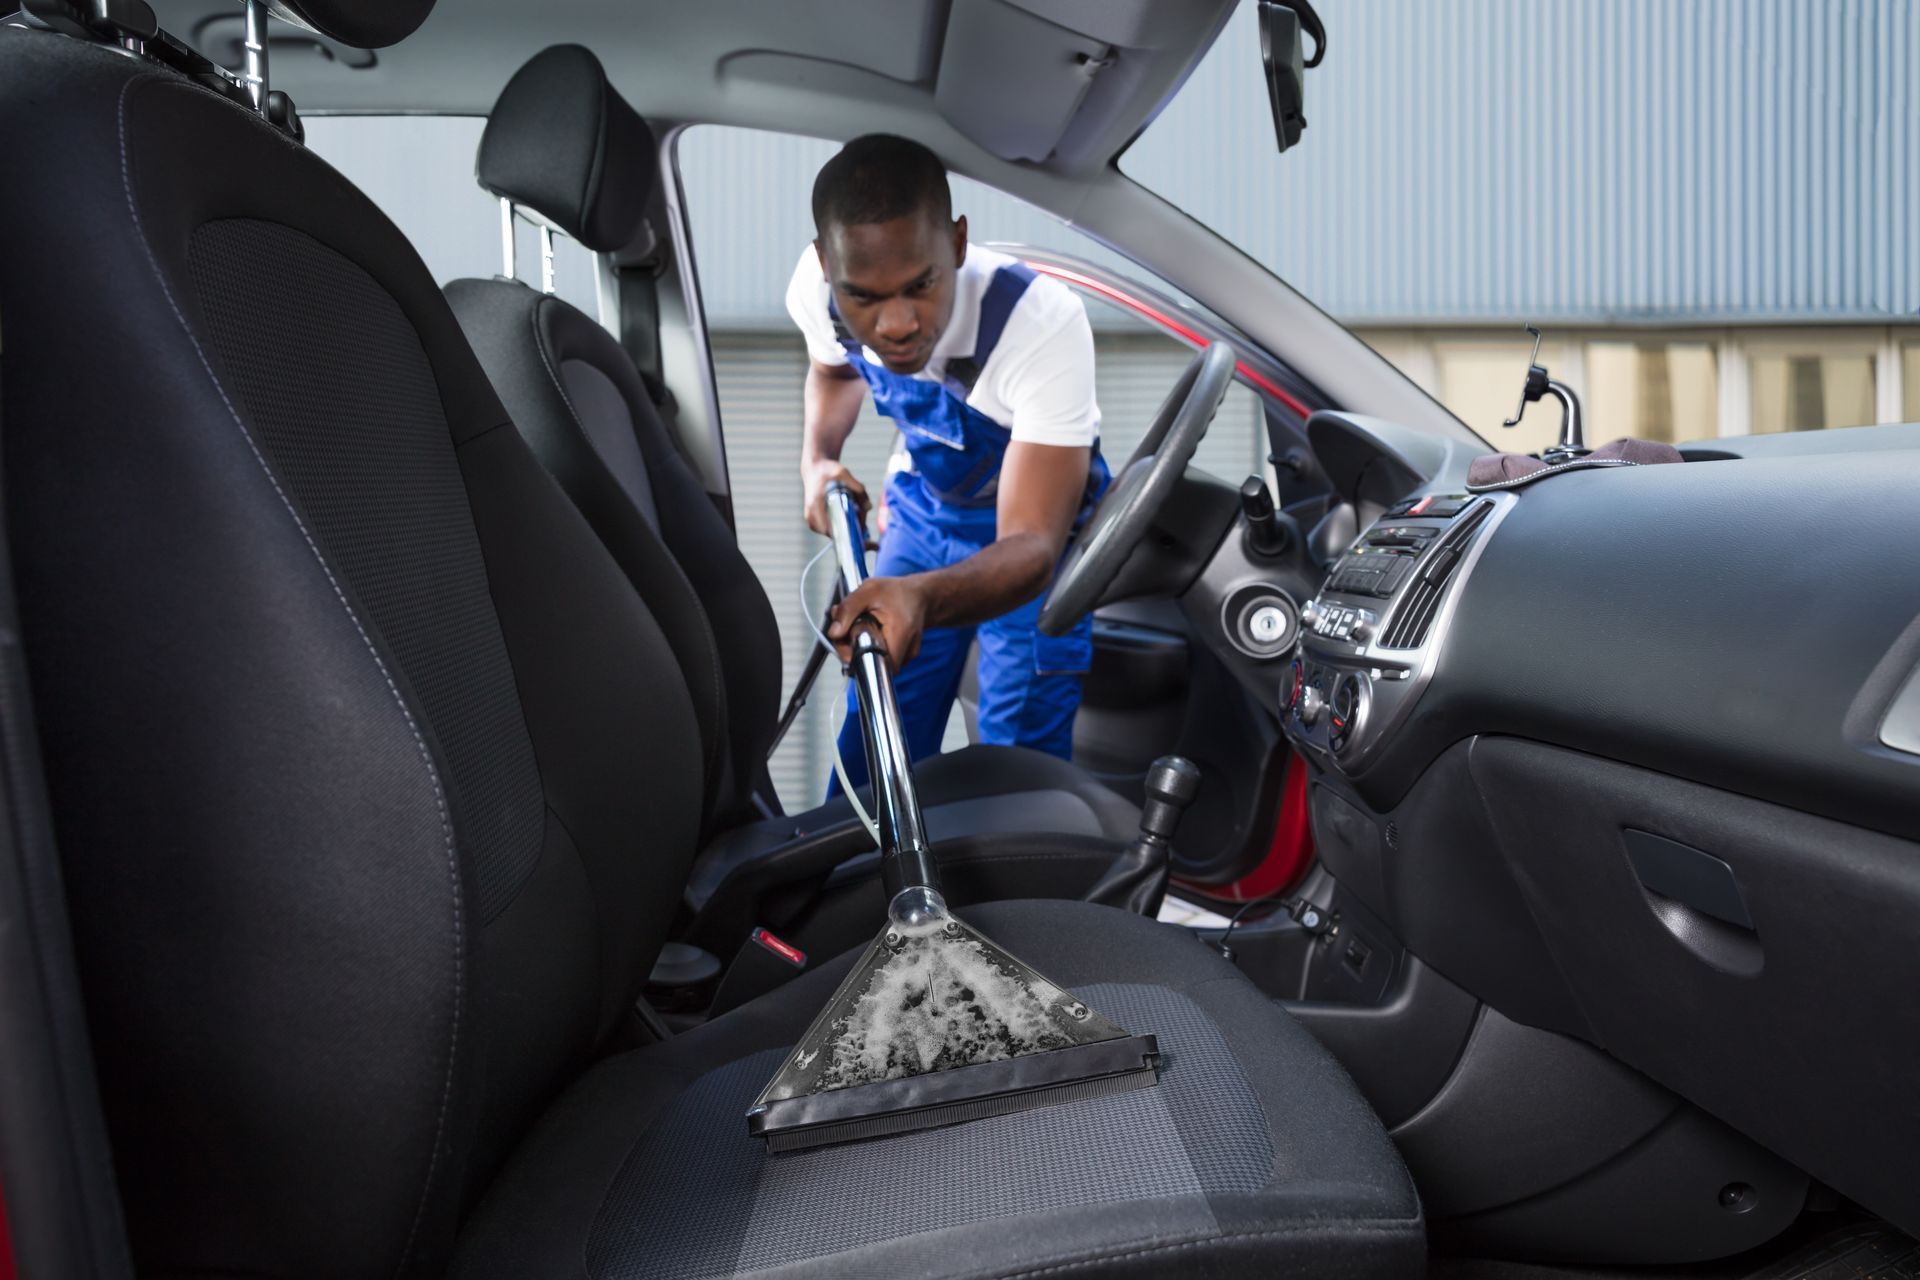 A man is cleaning the seats of a car with a vacuum cleaner.